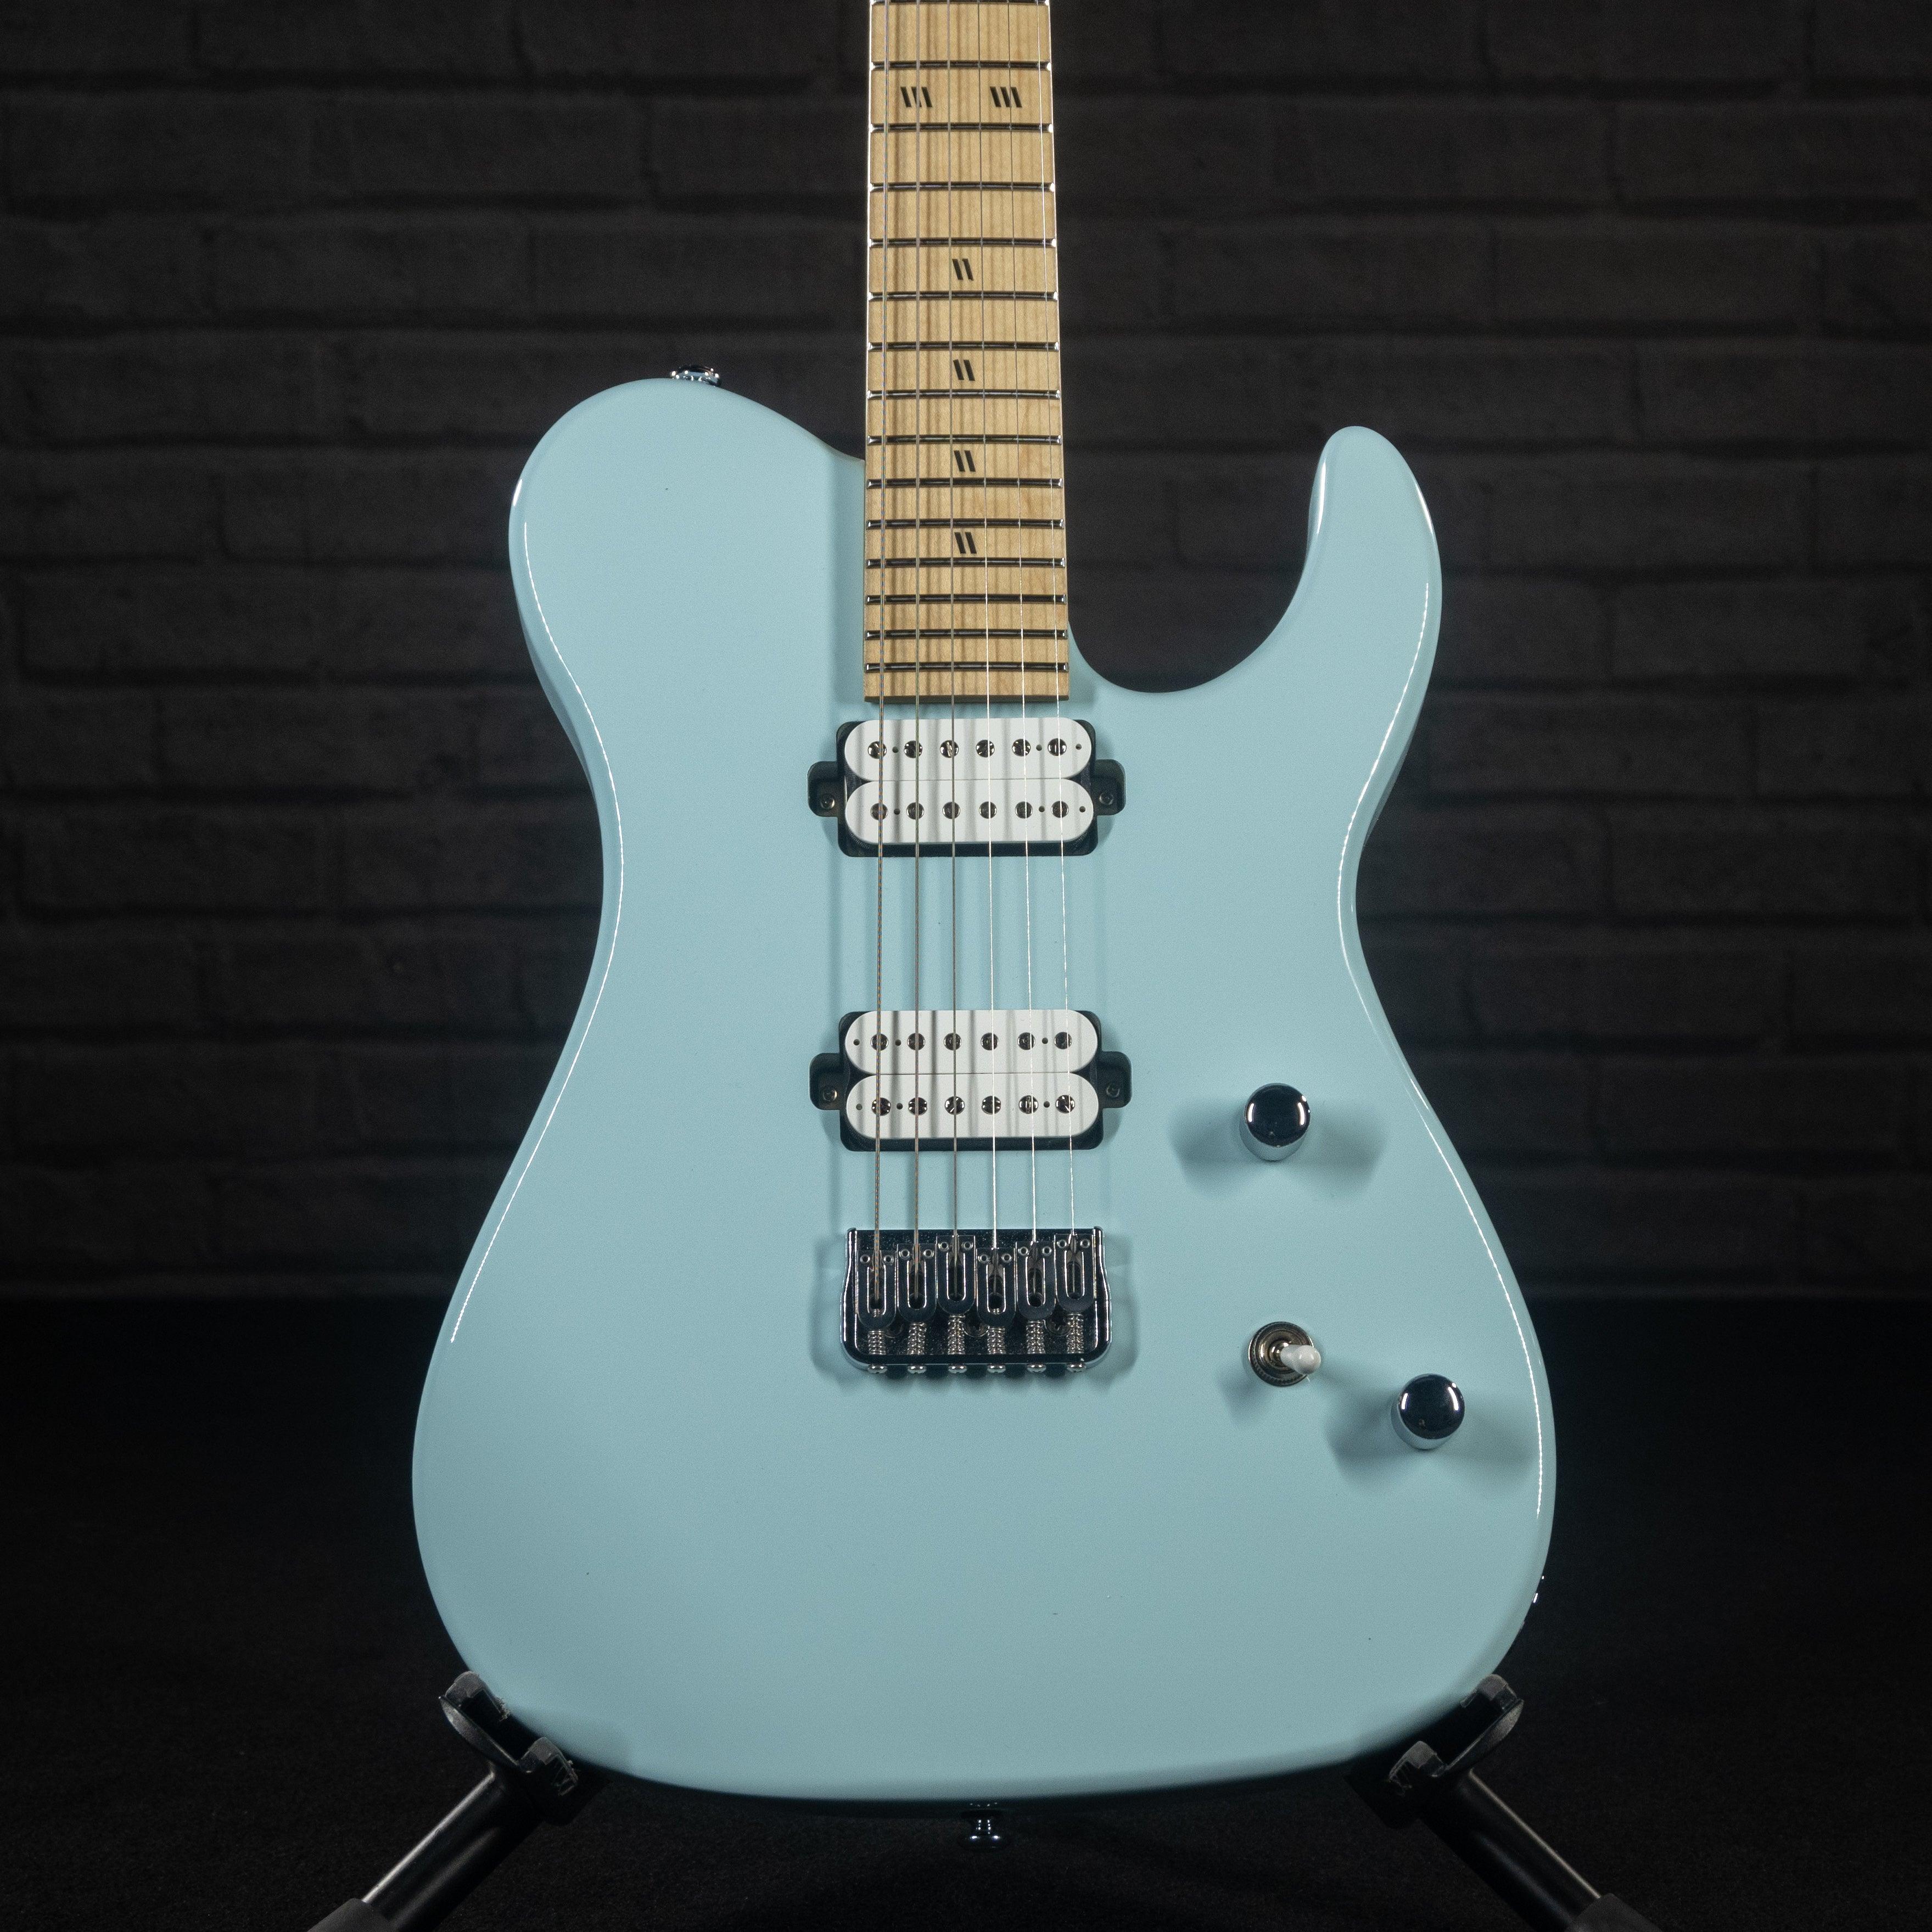 Sully Guitars 624T Electric Guitar (Ice Blue) USED - Impulse Music Co.